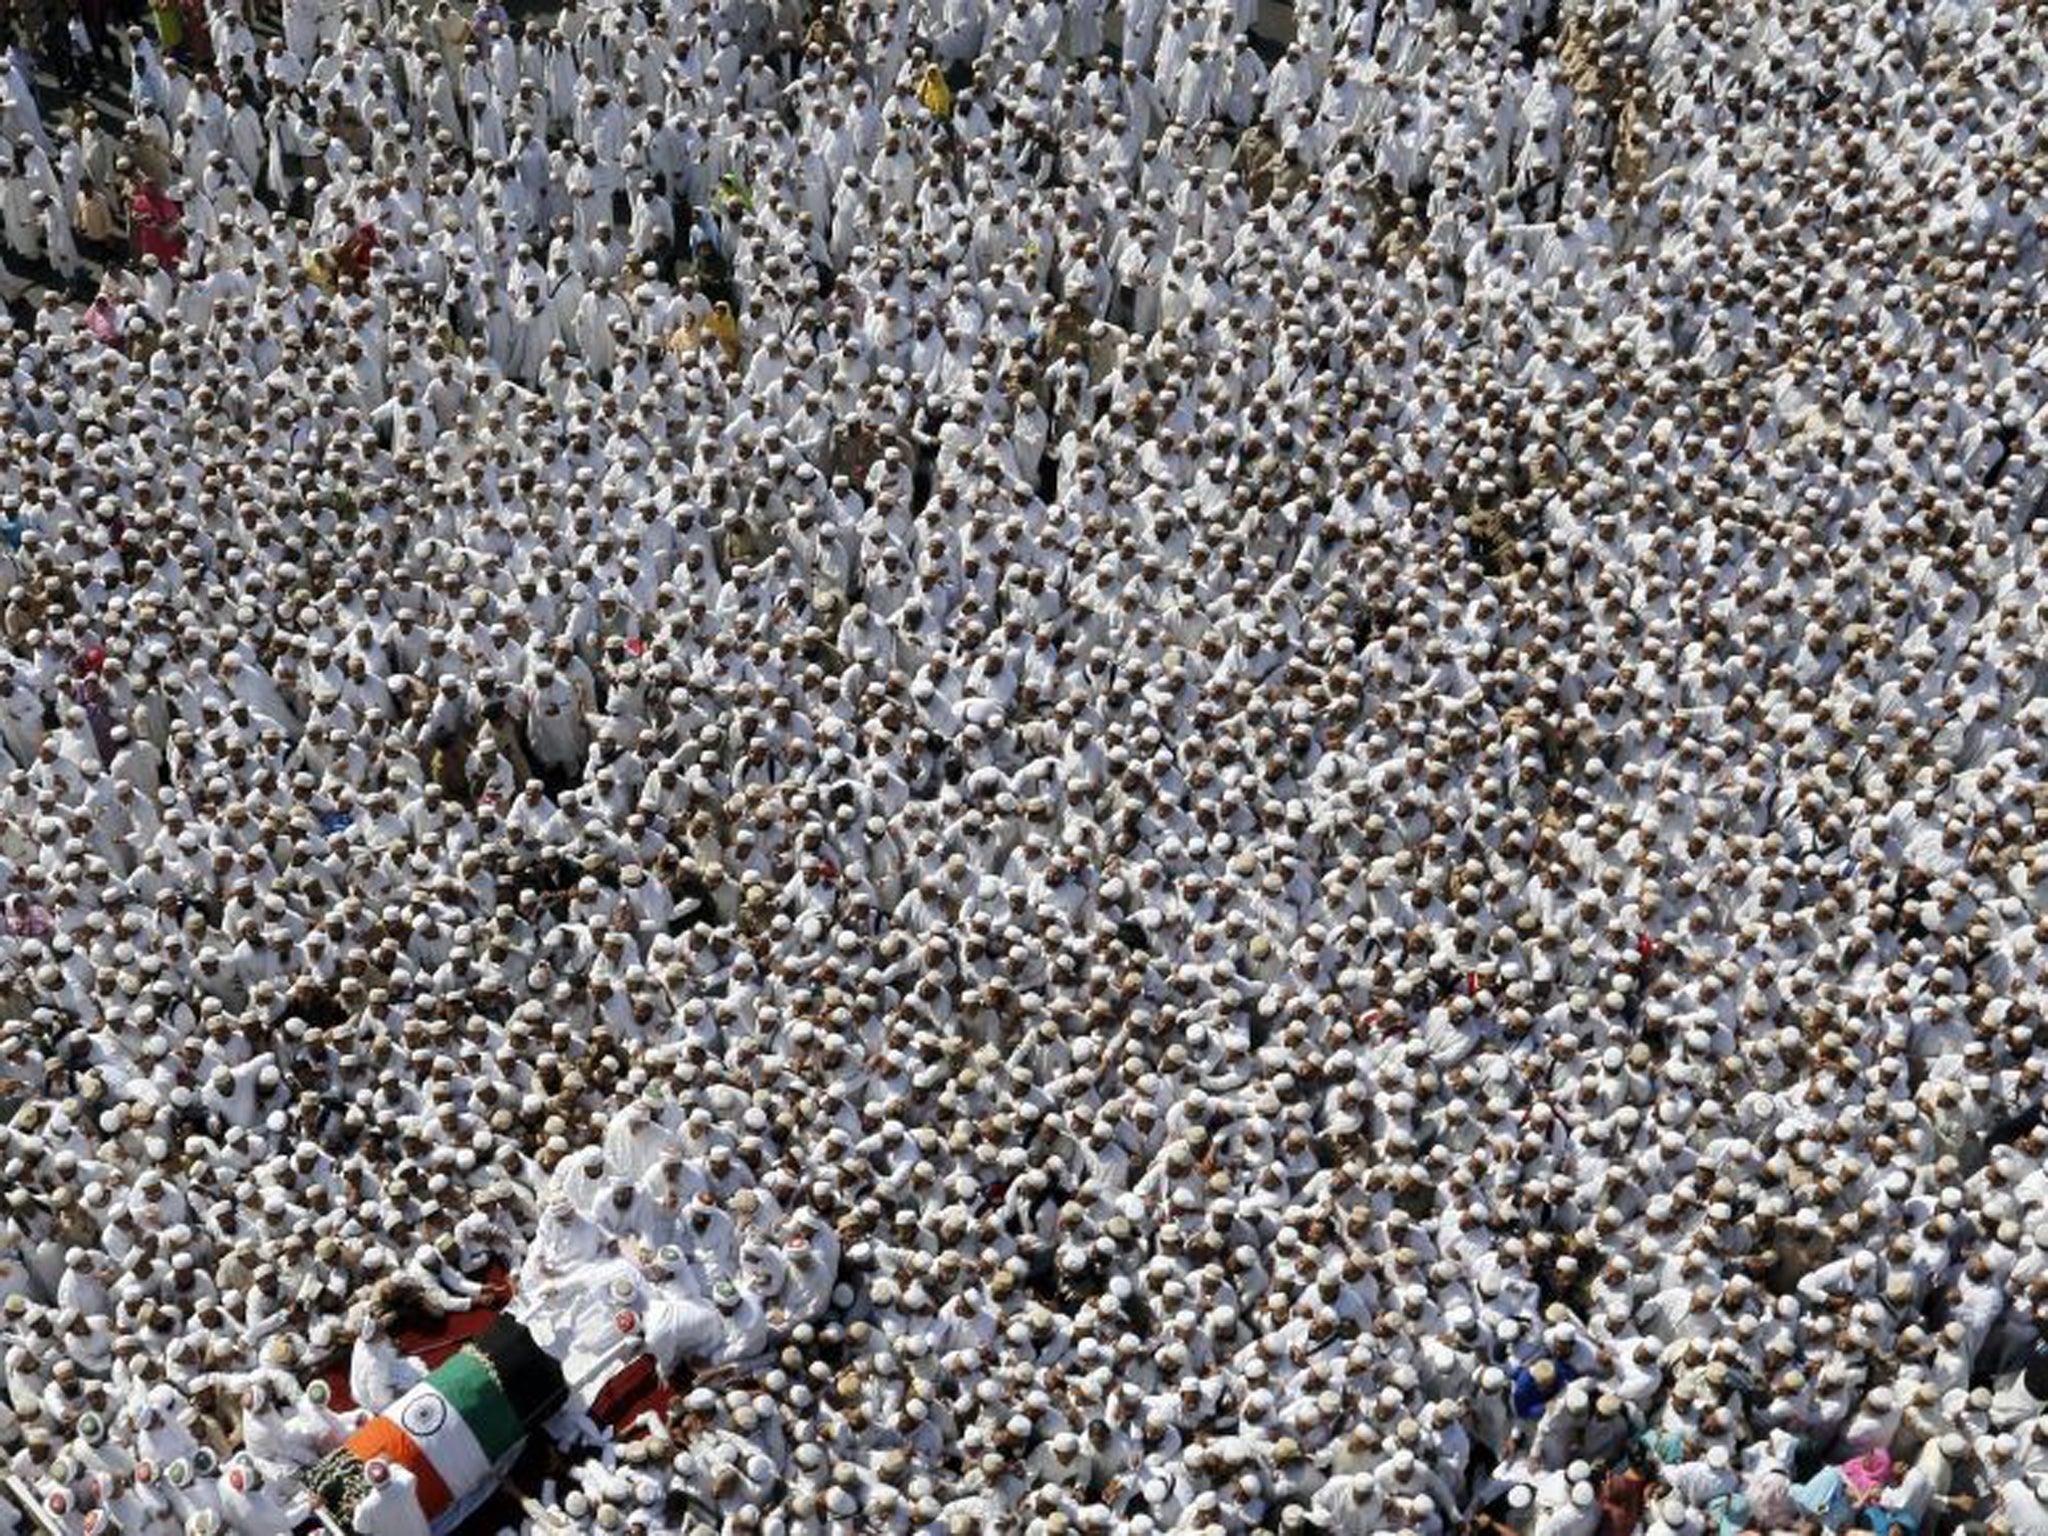 Tens of thousands of Dawoodi Bohra Muslims from all over India and other countries headed to Mumbai for Syedna Mohammed Burhanuddin's funeral